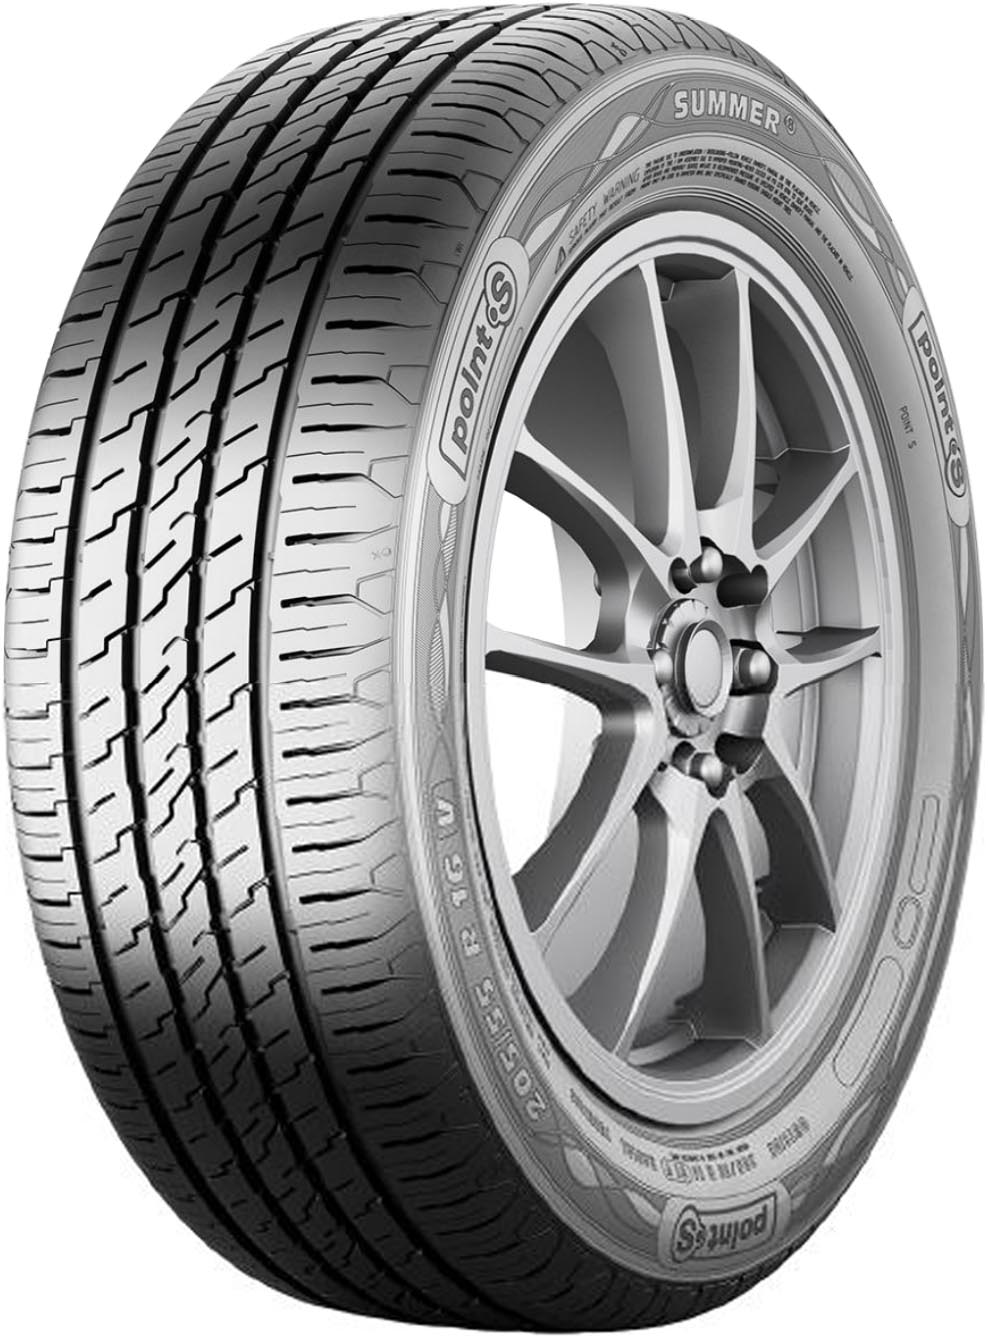 POINTS SUMMER S 175/65R14 82T